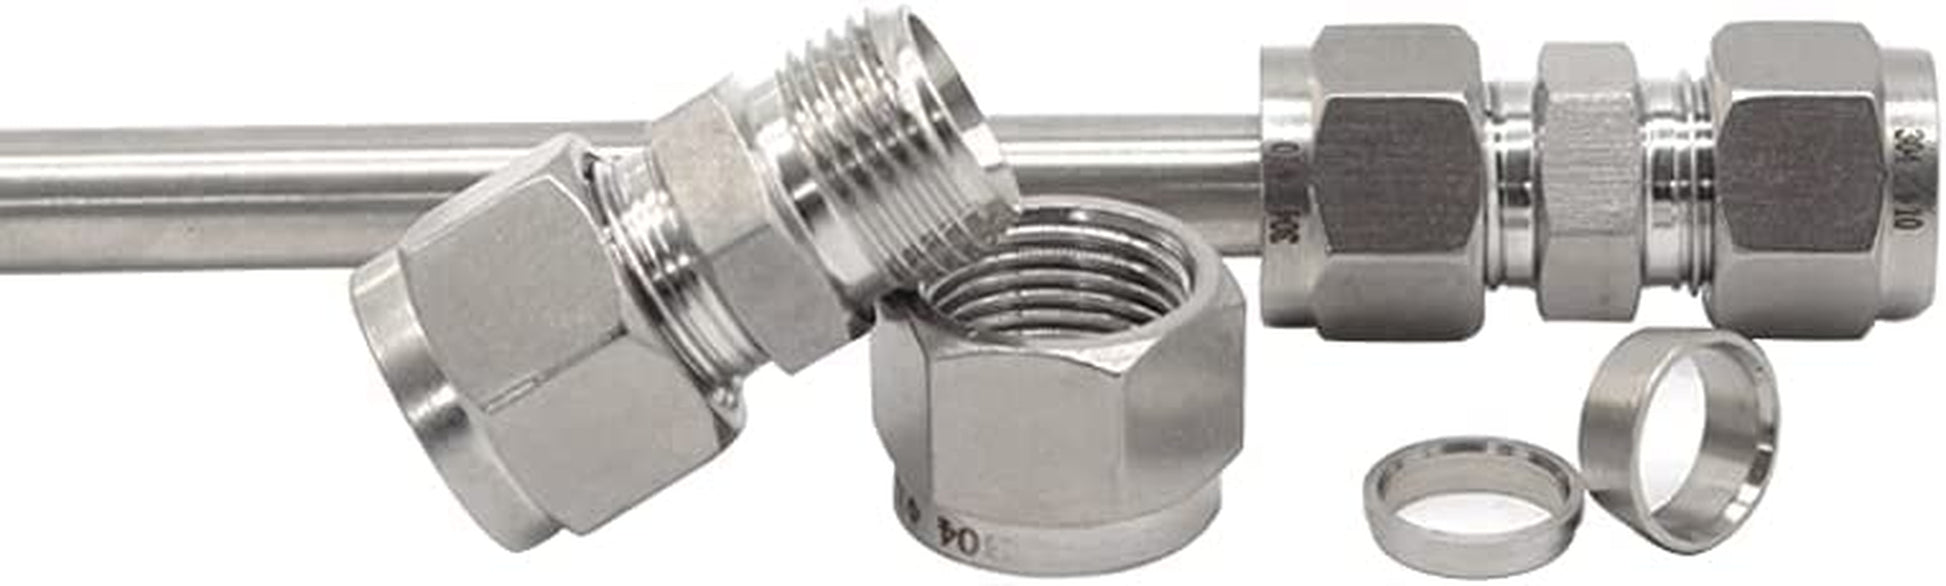 Metric 304 Stainless Steel Compression Tube Fitting, Union, W/Double Ferrule, 10Mm Tube OD X 10Mm Tube OD (2 Pcs)